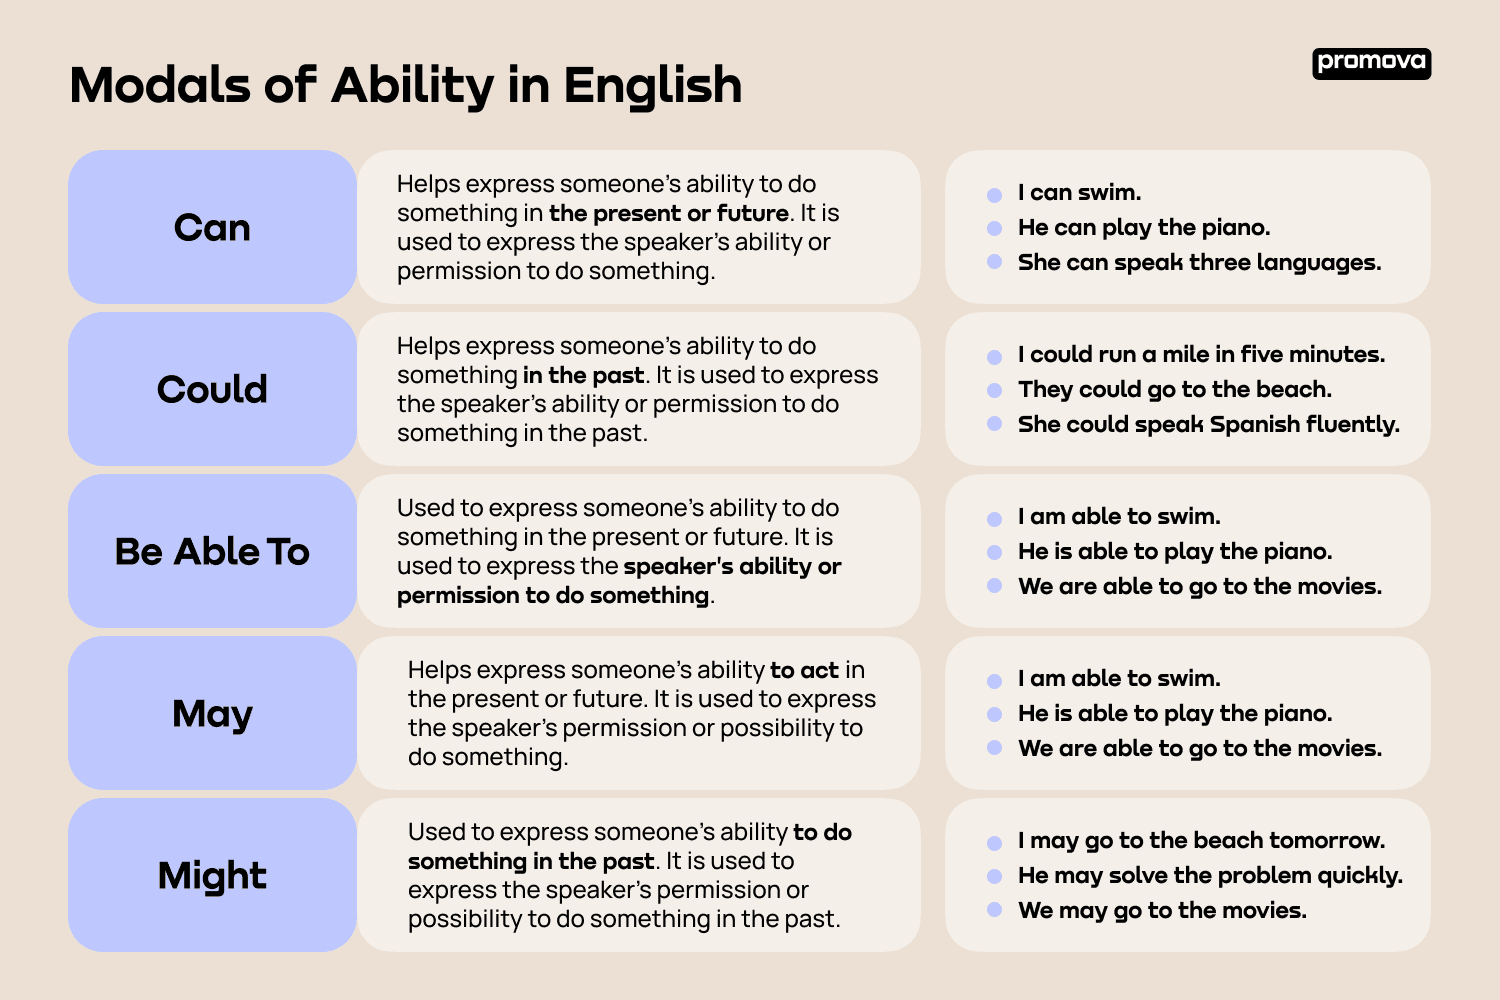 Modals of Ability in English